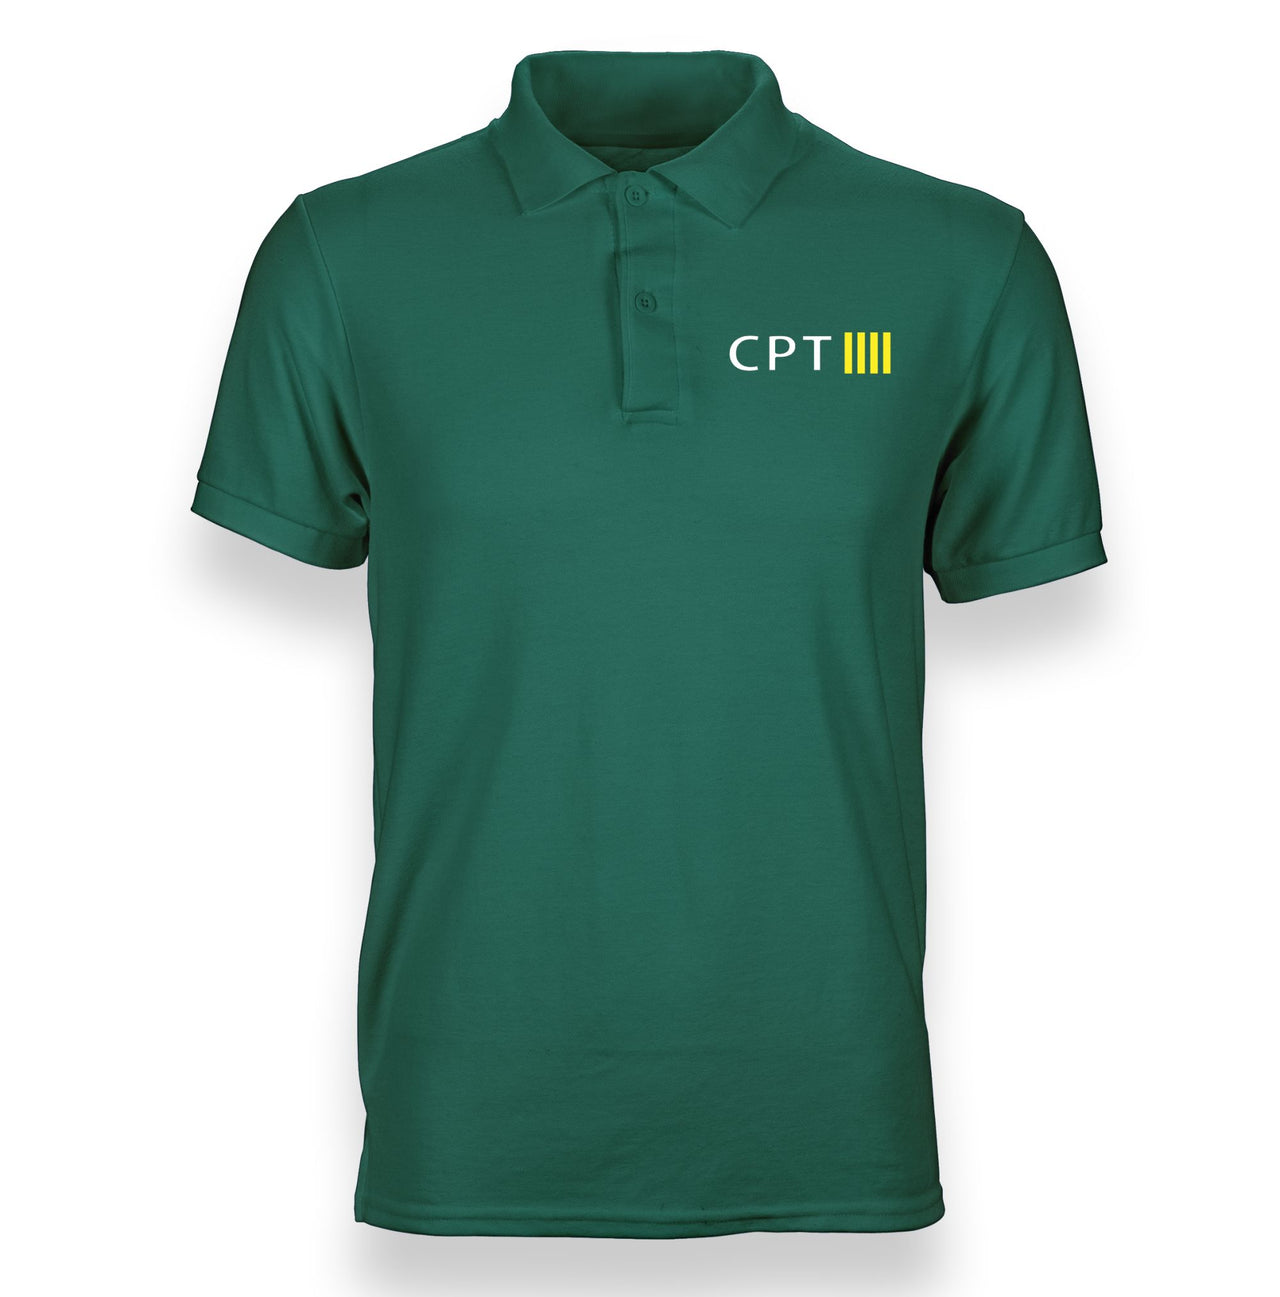 CPT & 4 Lines Designed "WOMEN" Polo T-Shirts